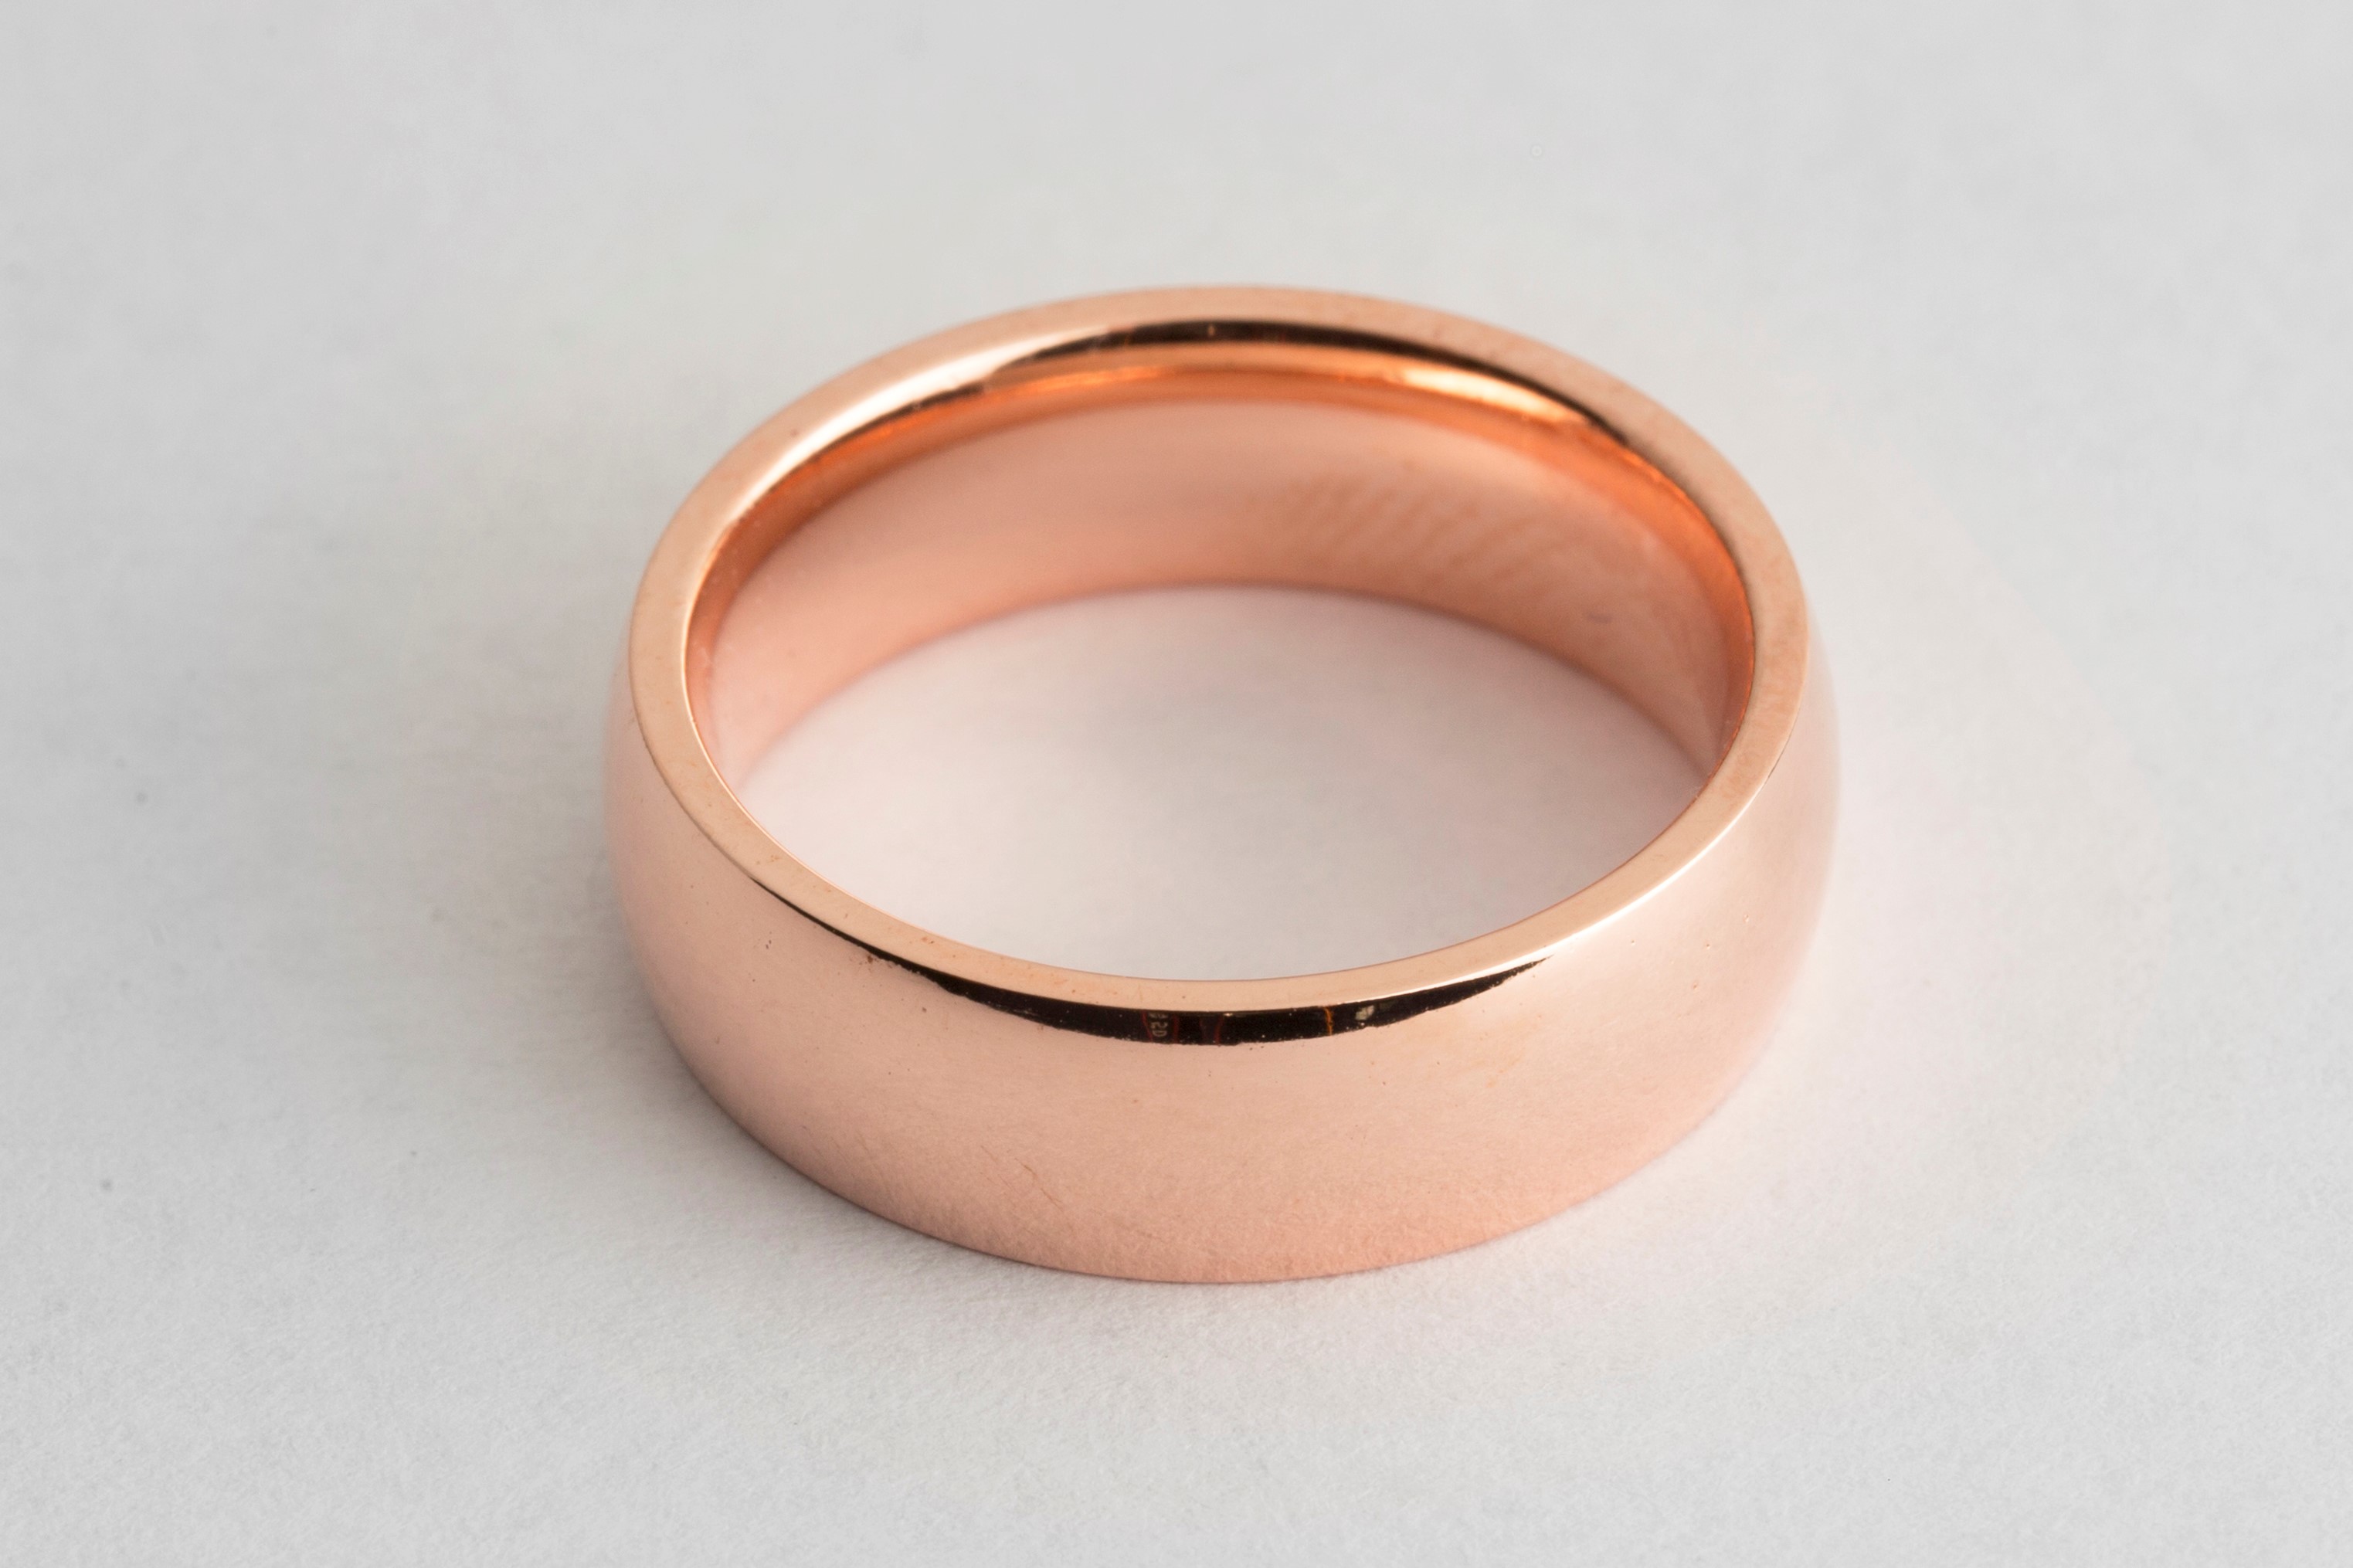 Wedding ring electroplated in rose gold solution